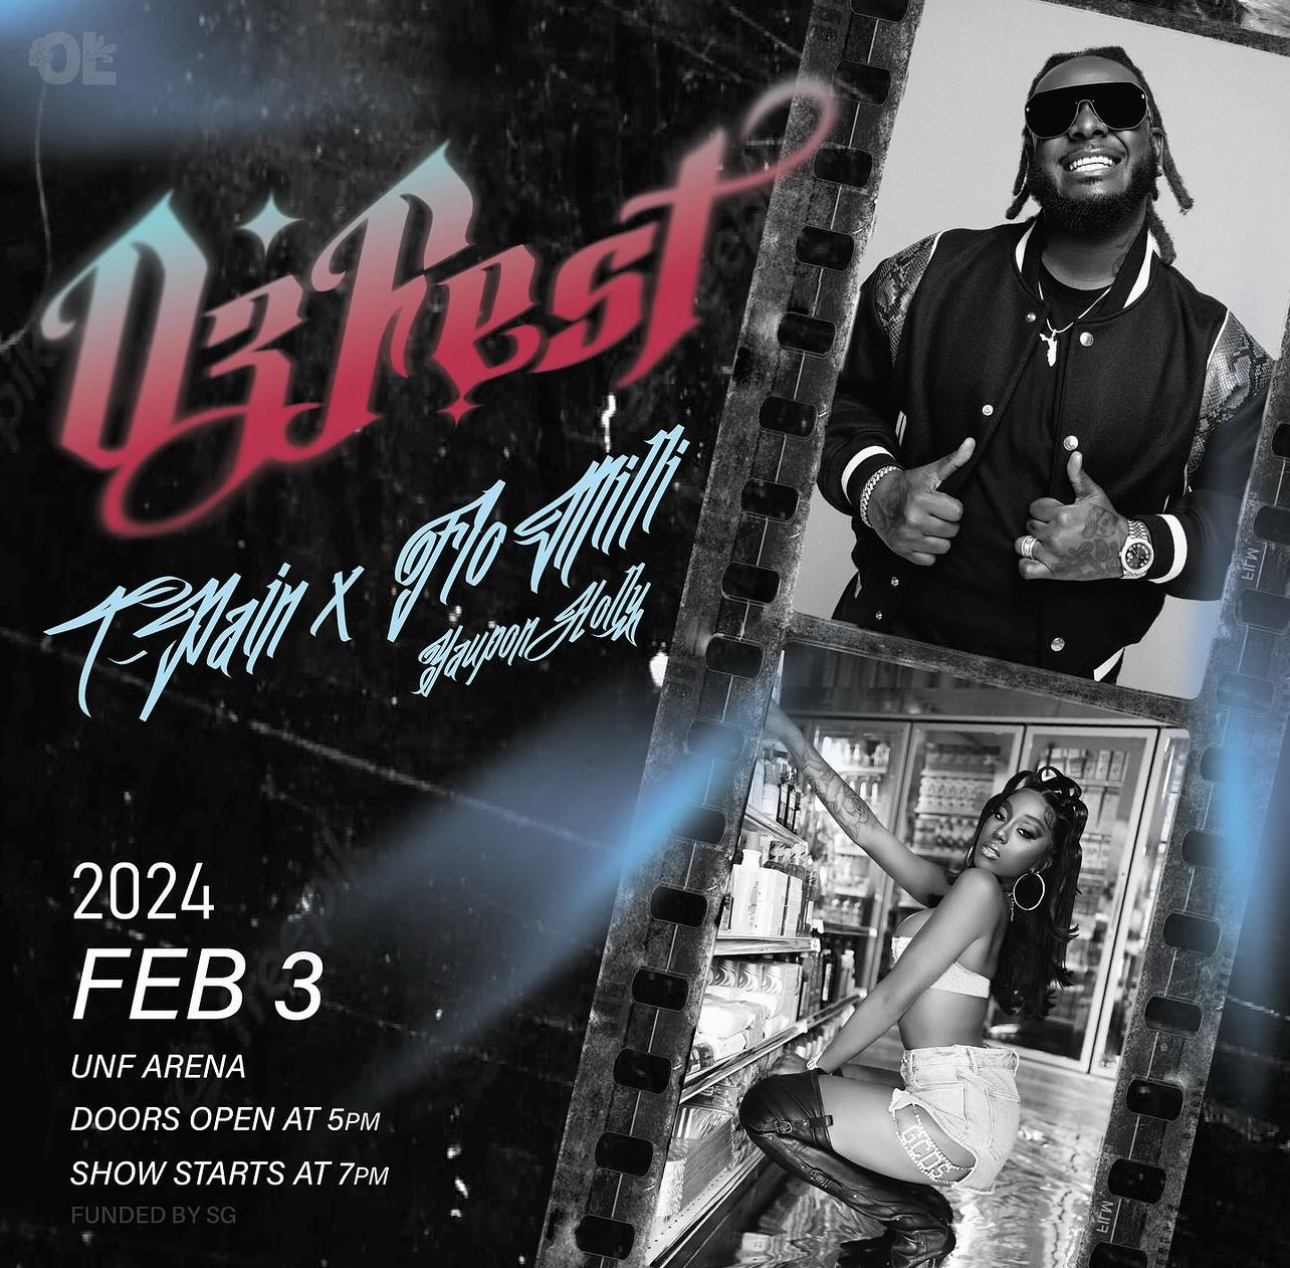 OzFest featuring T-Pain and Flo Milli, February 3 at the UNF Arena. Doors open at 5 p.m., show starts at 7 p.m.